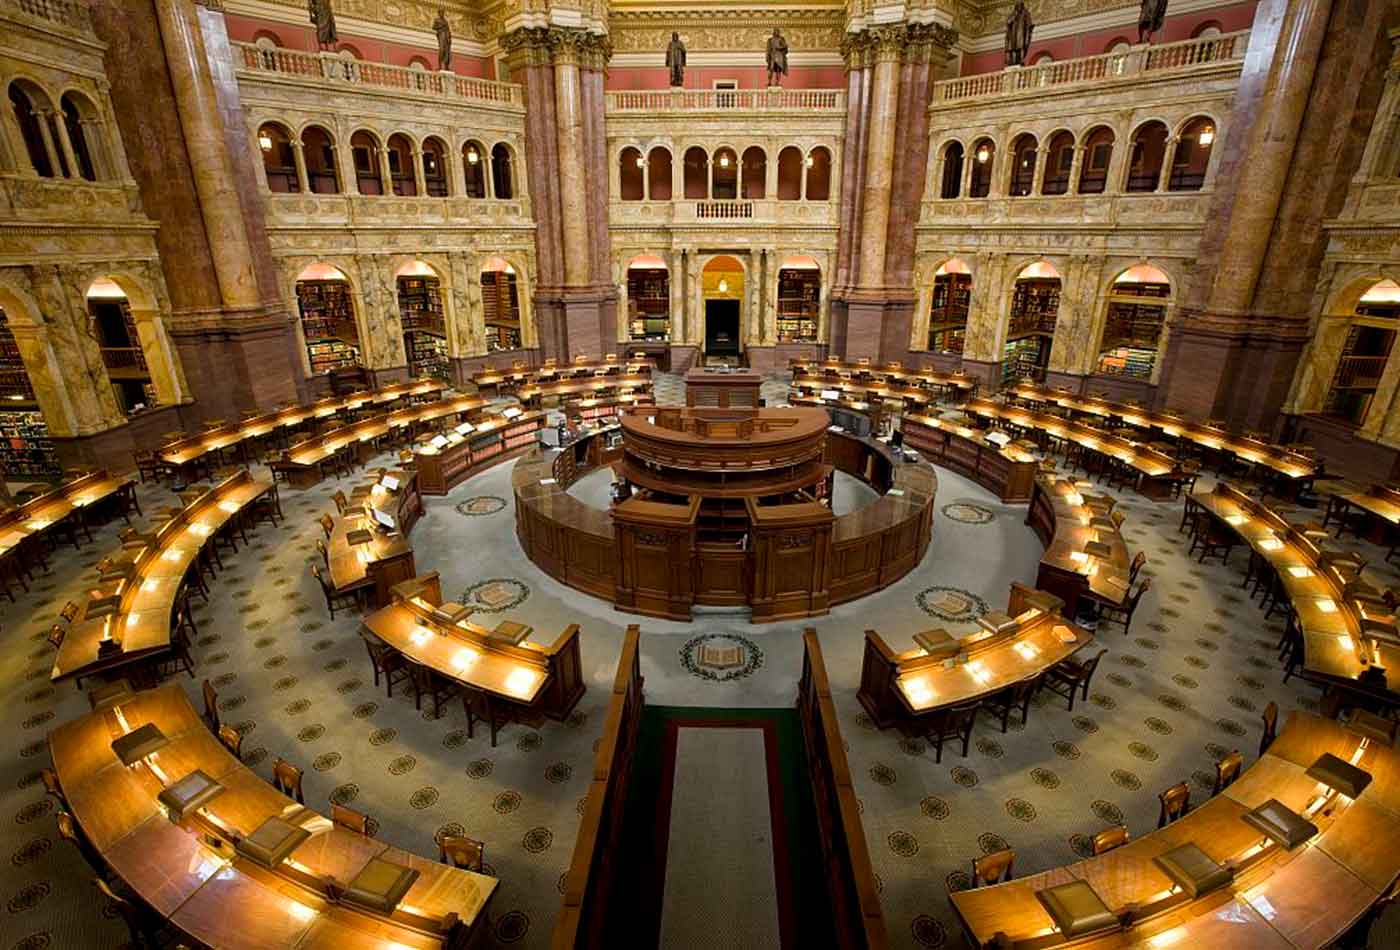 Main reading room at the Library of Congress